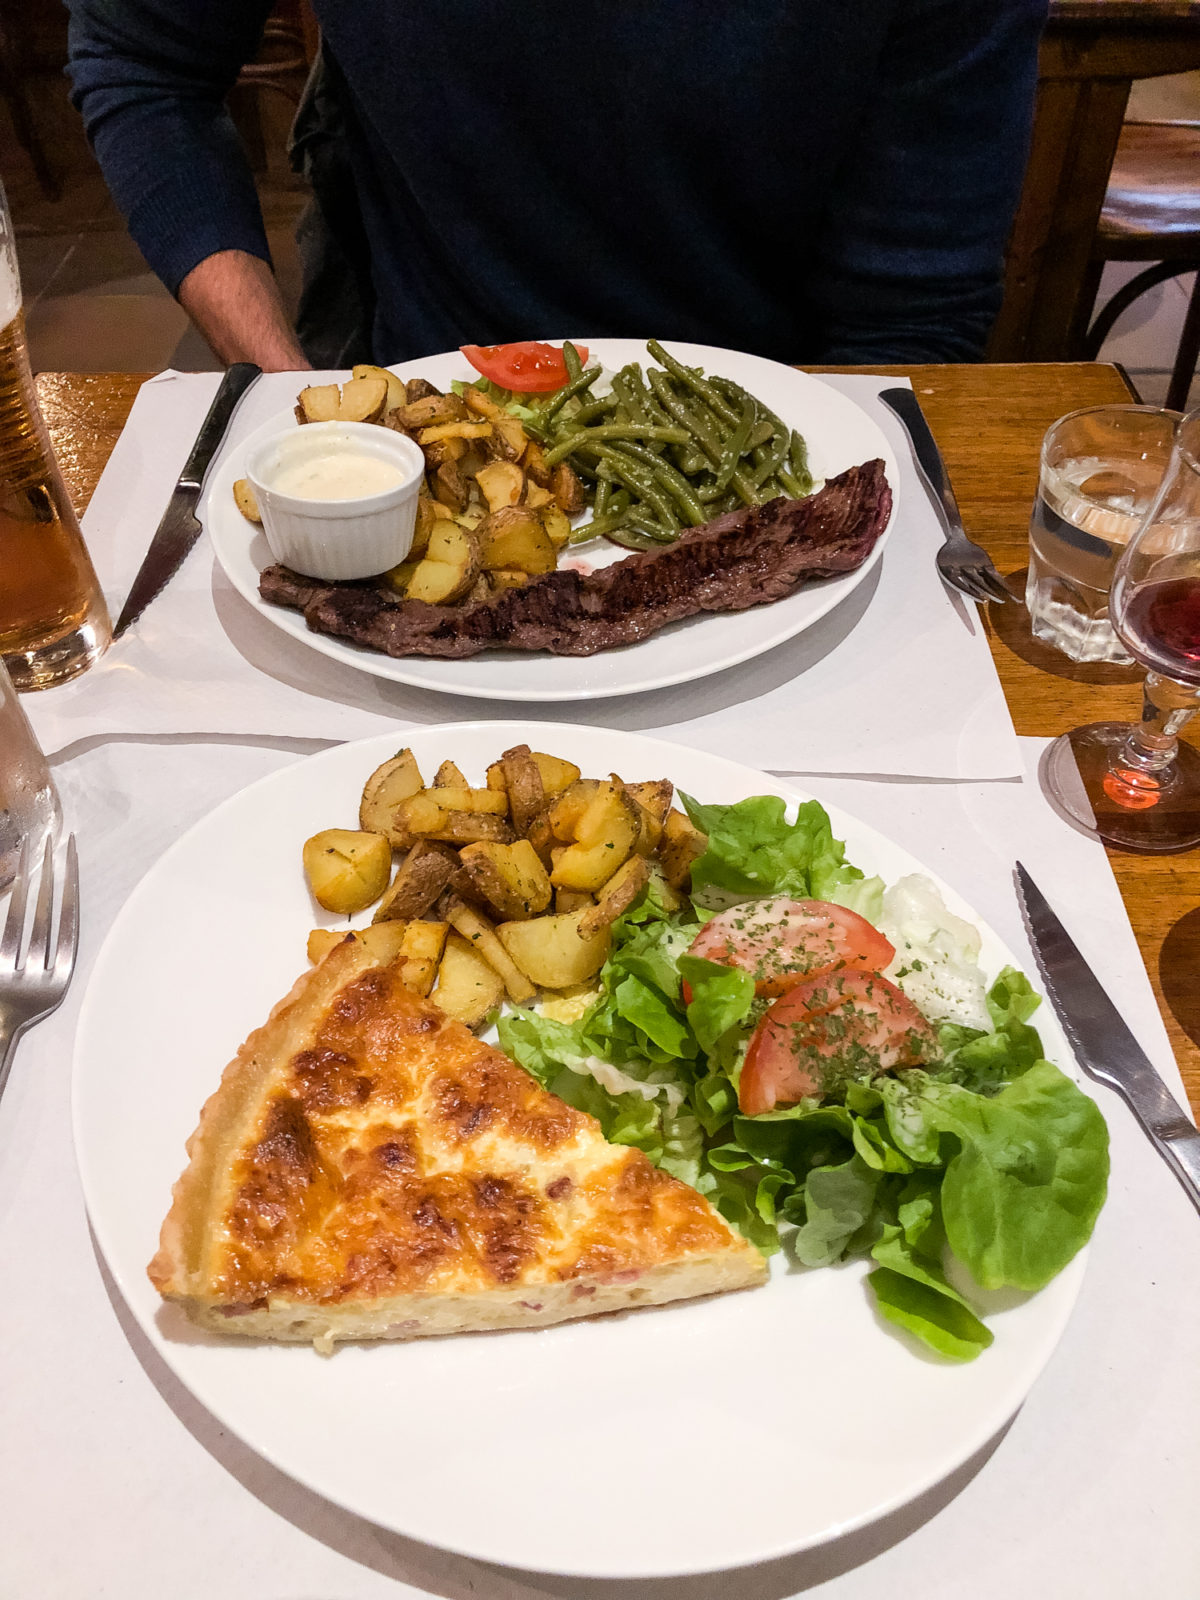 Quiche and steak from Smoke Bar and Restaurant in Paris France